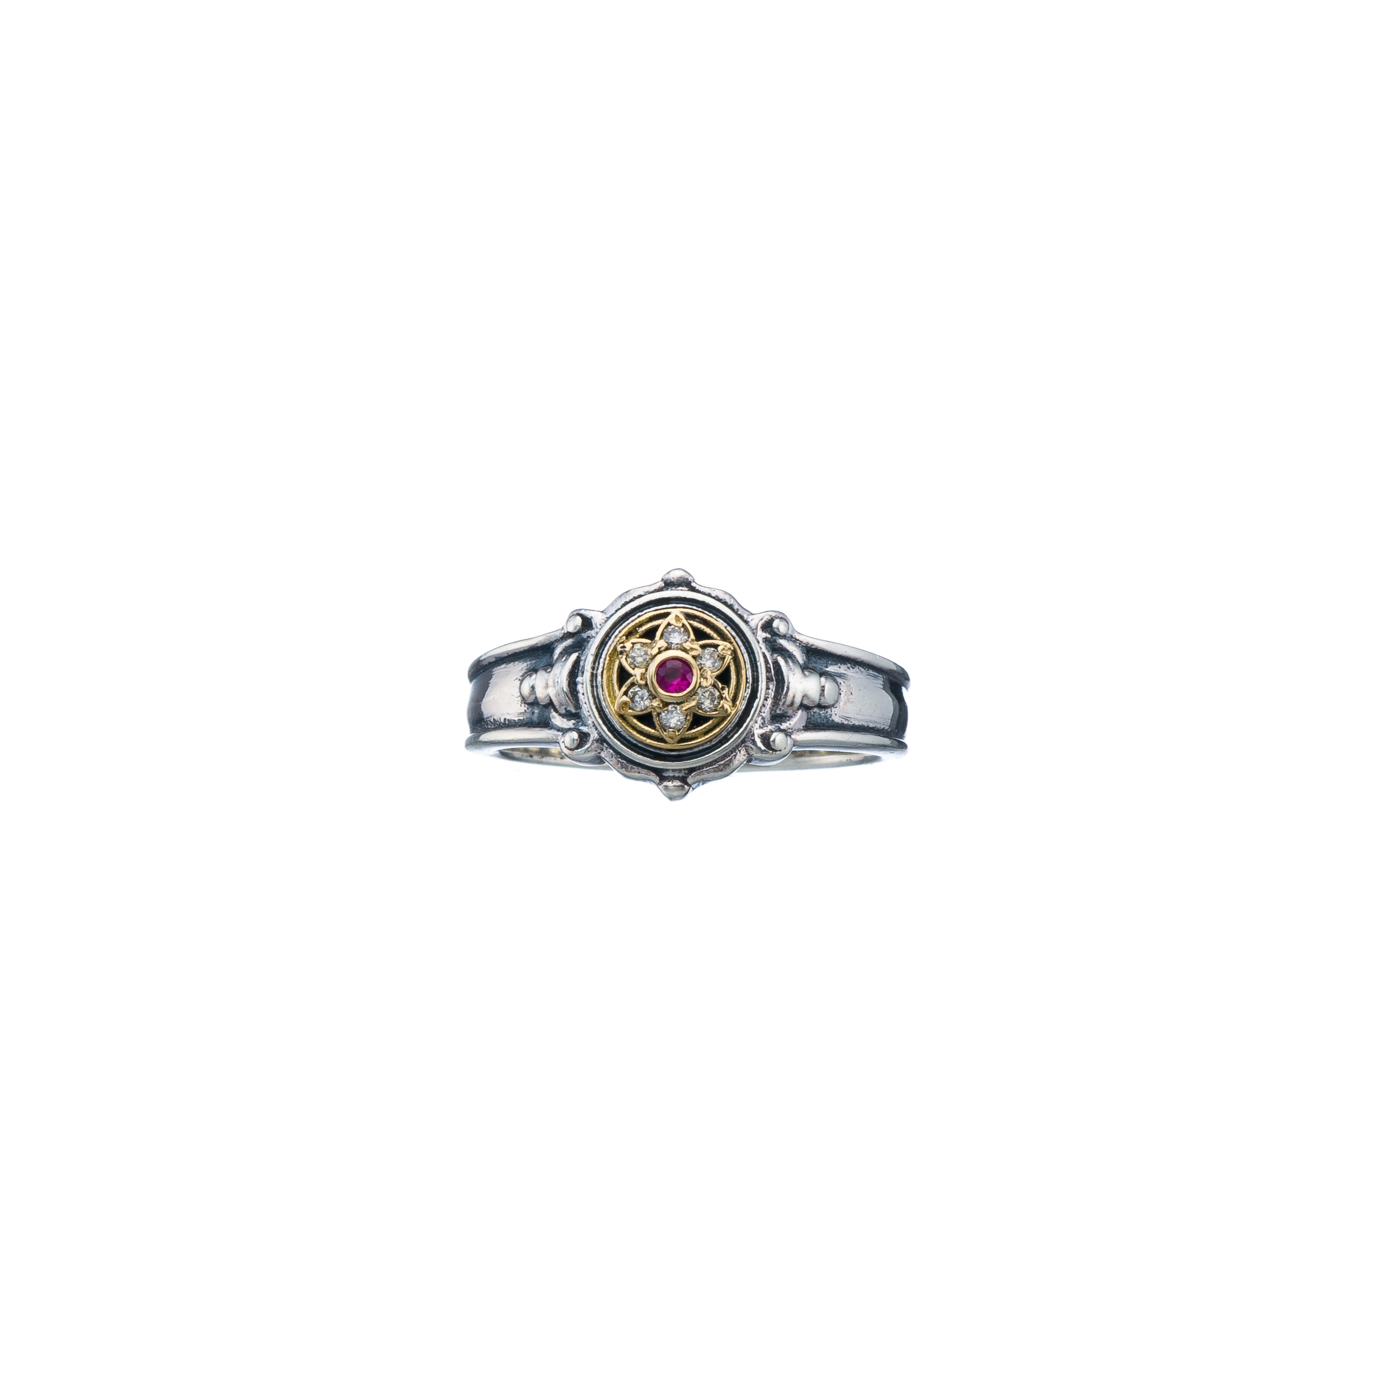 Symbol ring in 18K Gold and Sterling silver with precious stones